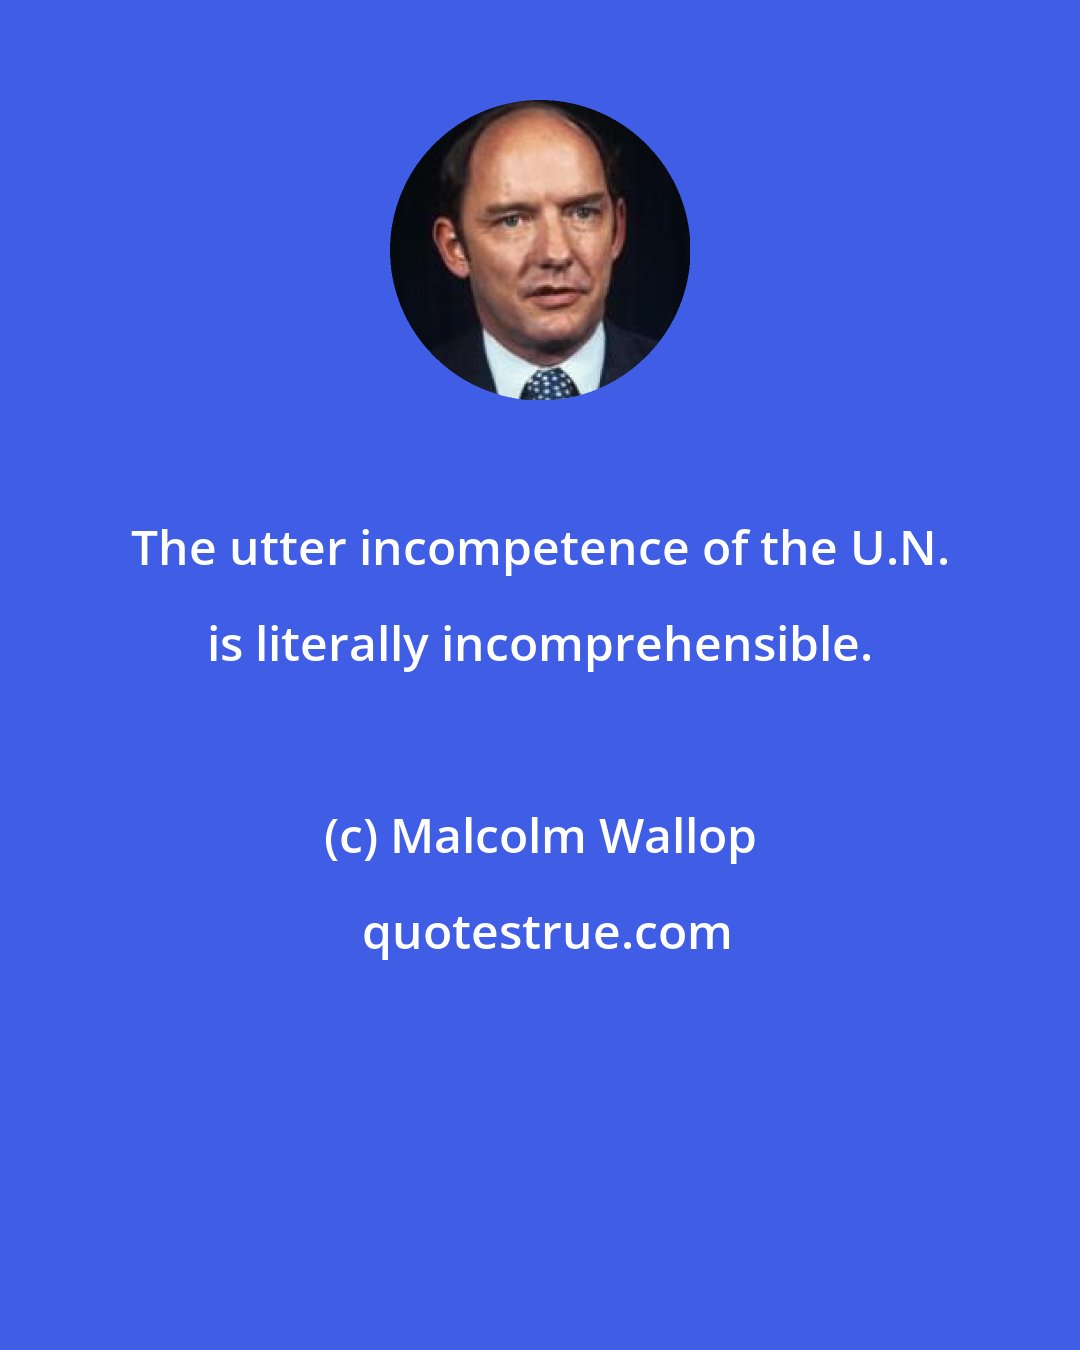 Malcolm Wallop: The utter incompetence of the U.N. is literally incomprehensible.